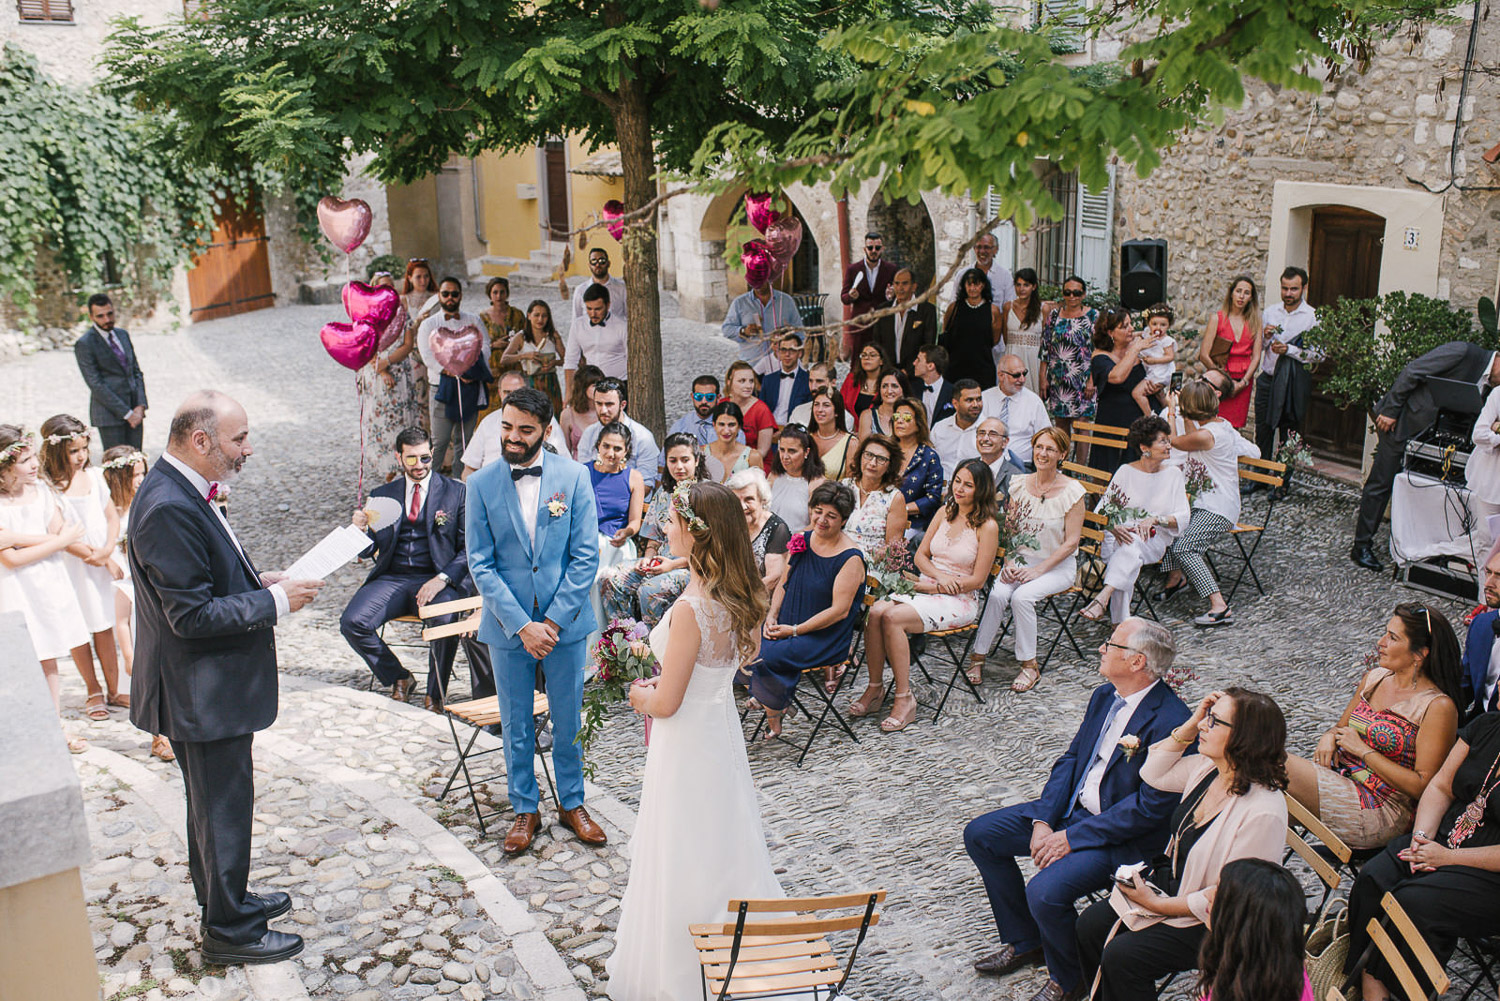 photographe mariage famille entreprise grenoble lyon annecy chambery mariage provence